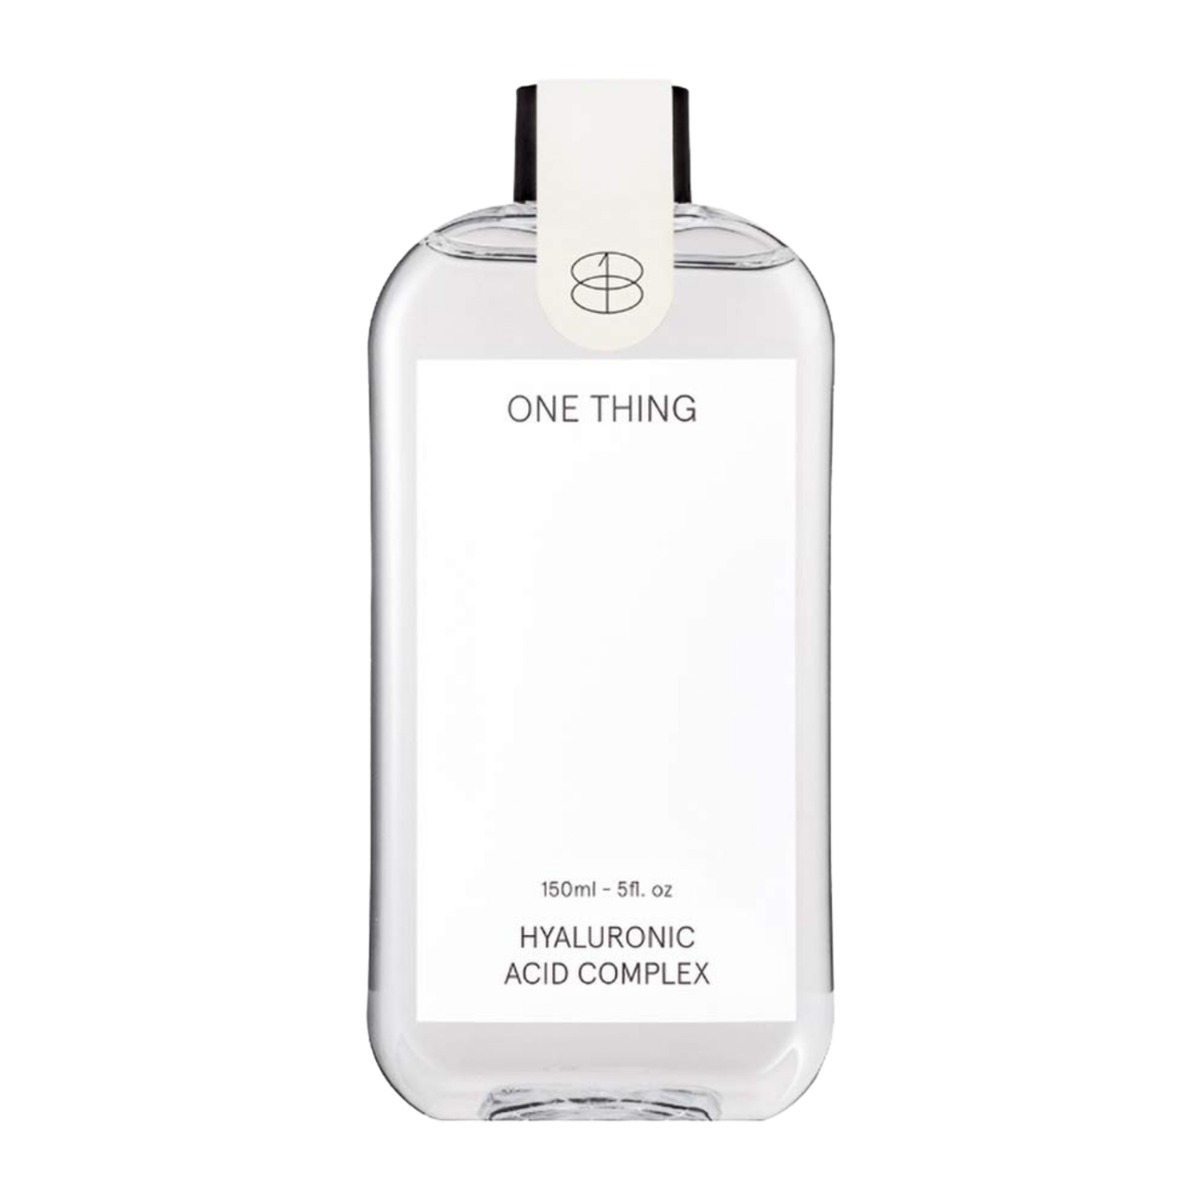 One Thing Hyaluronic Acid Complex, 150ml